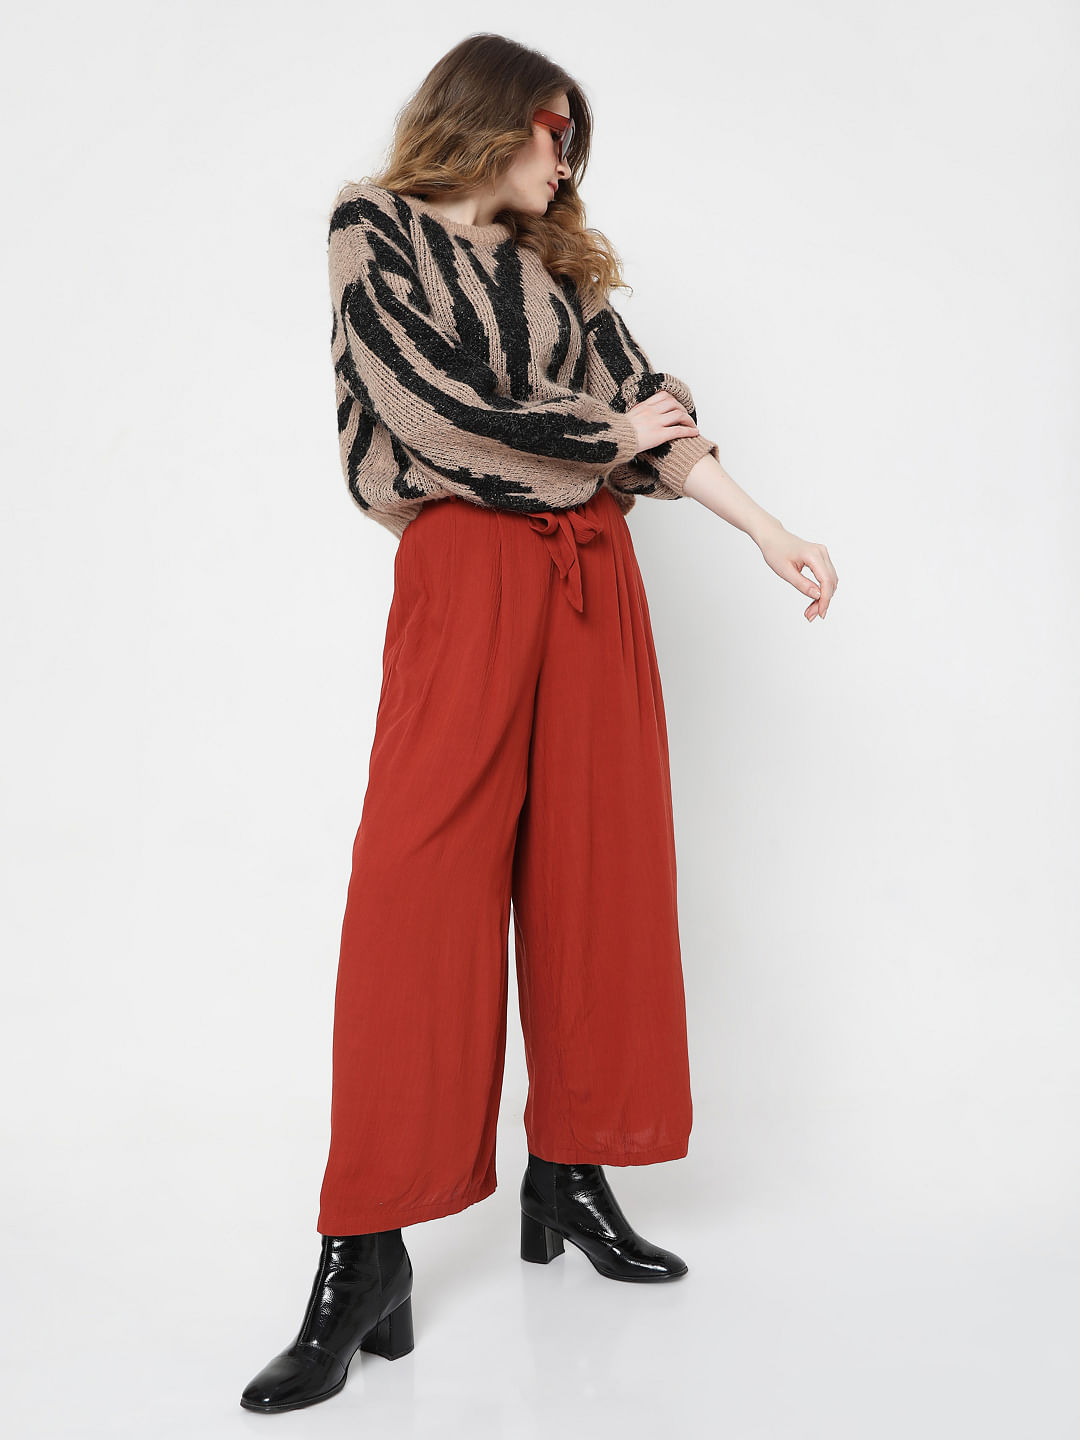 Shop High-Waisted Palazzo Pants for Women from latest collection at Forever  21 | 501668